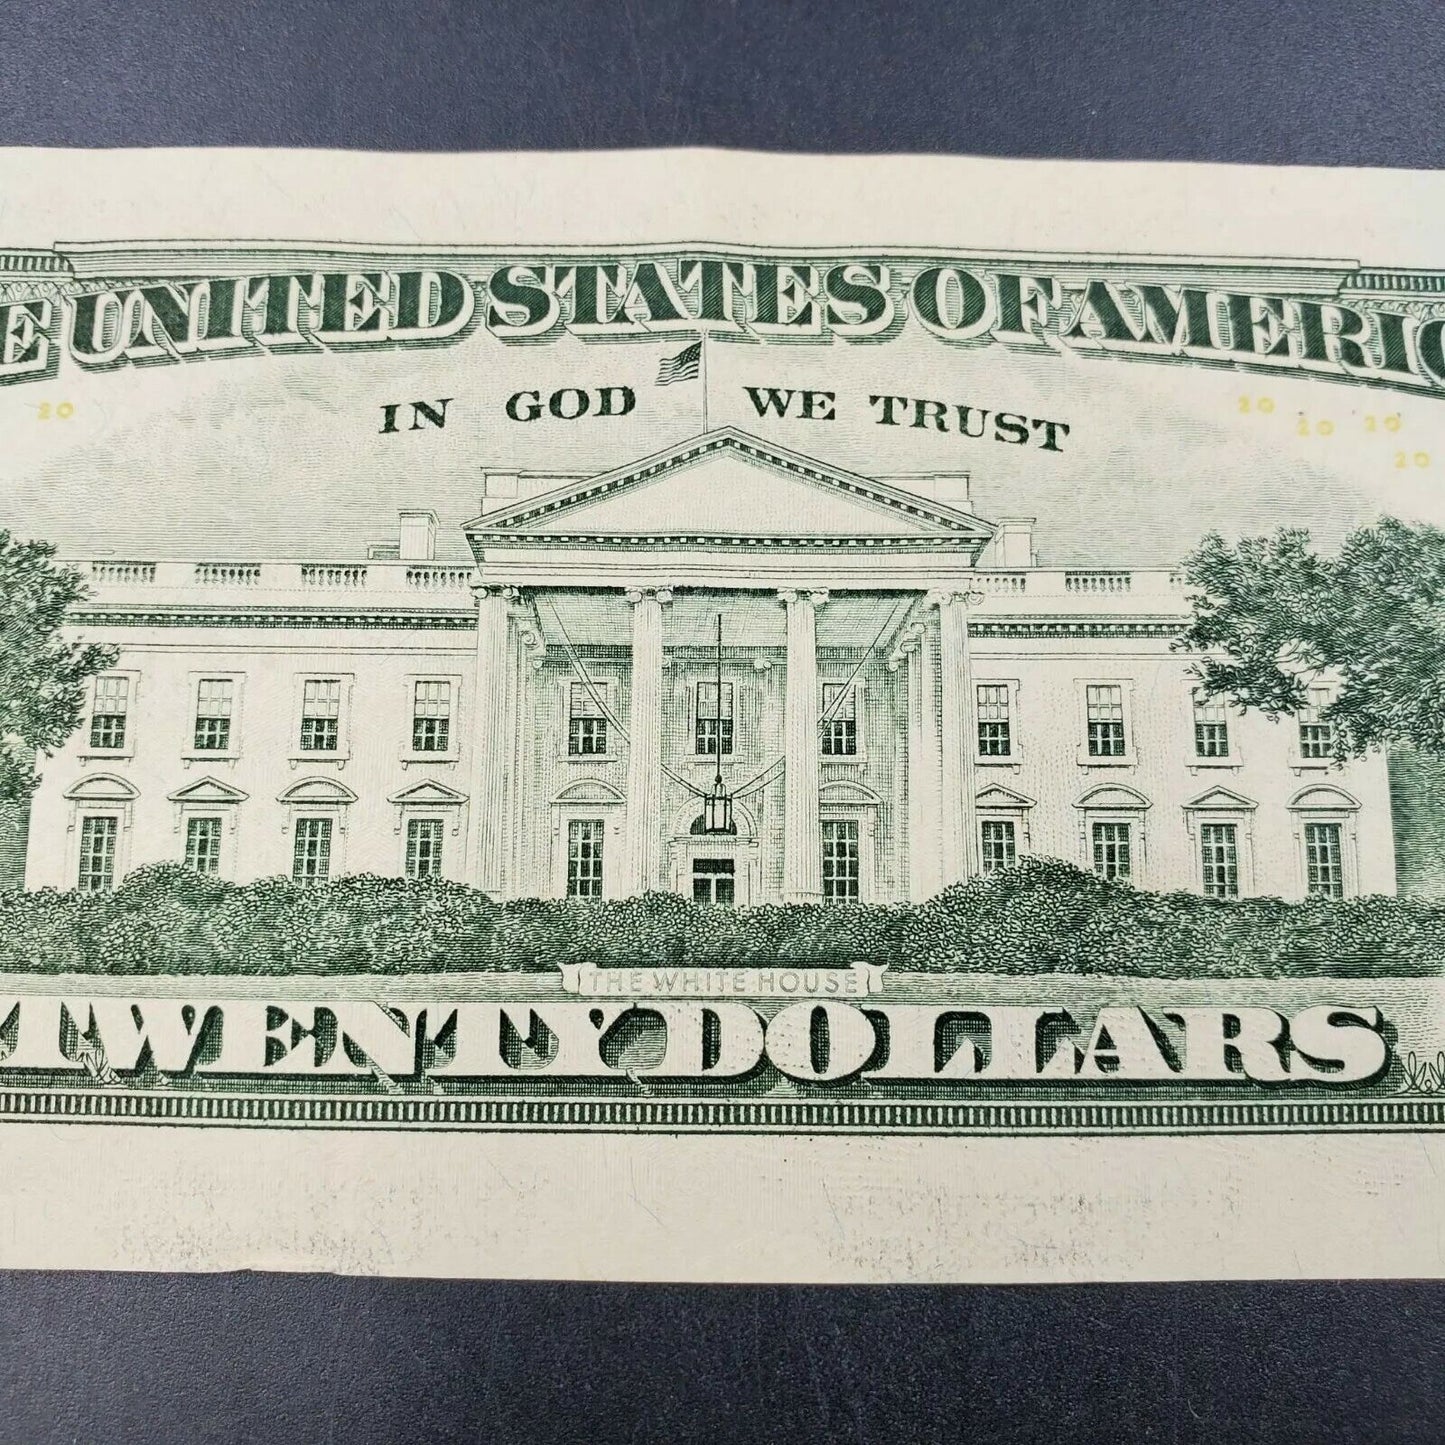 2017 $20 FRN Federal Reserve Star * Note DOUBLE REPEAT Serial Number # Circulate